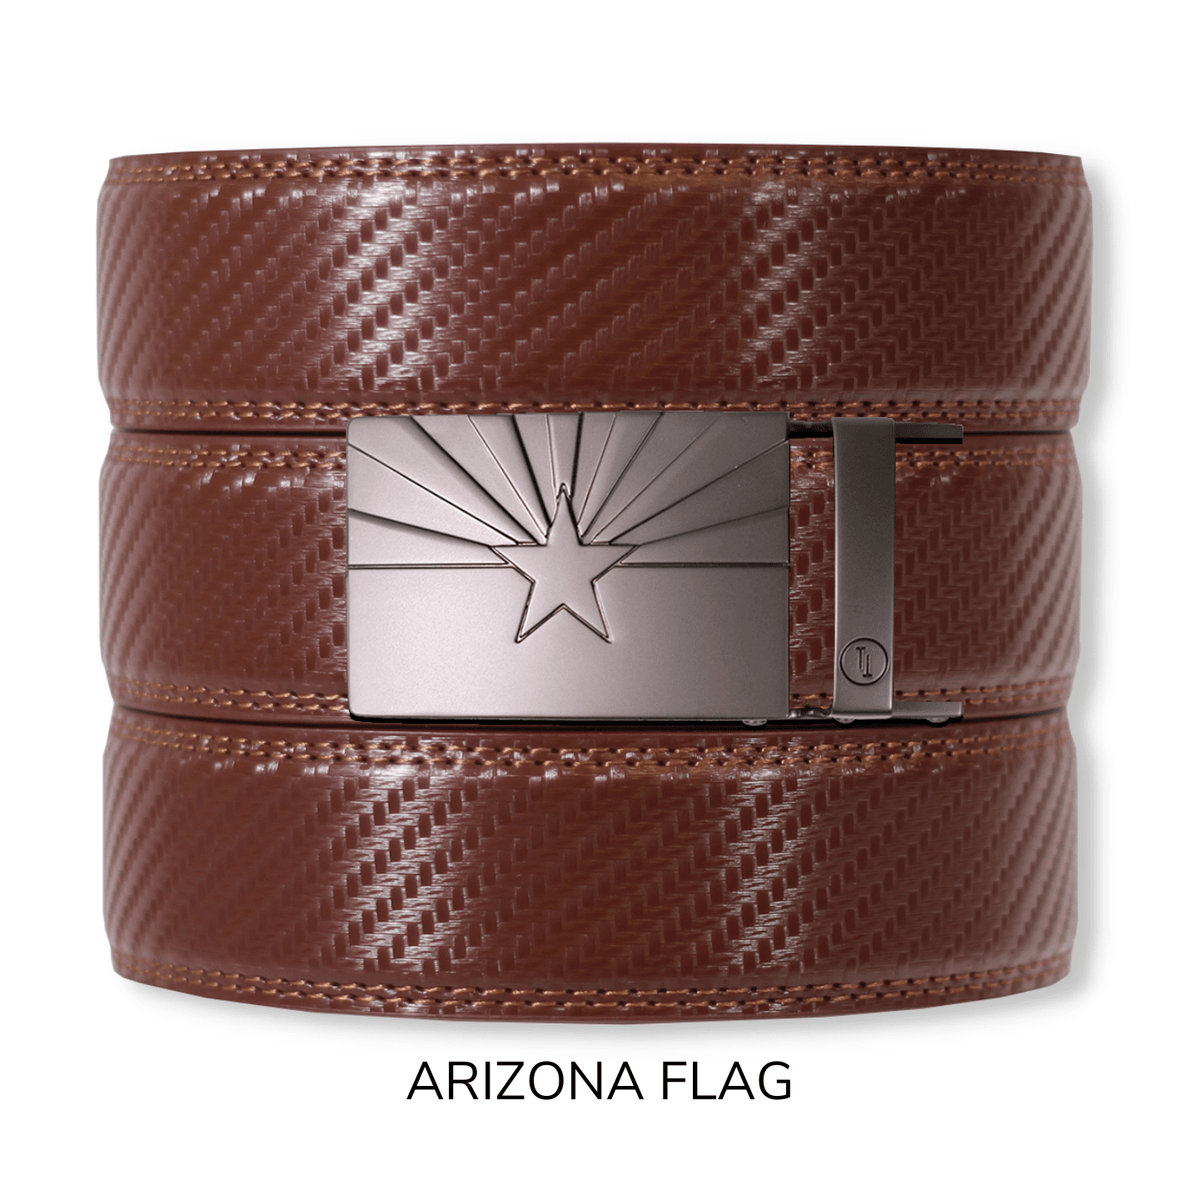 Lv Flags 40mm Belt Other Leathers